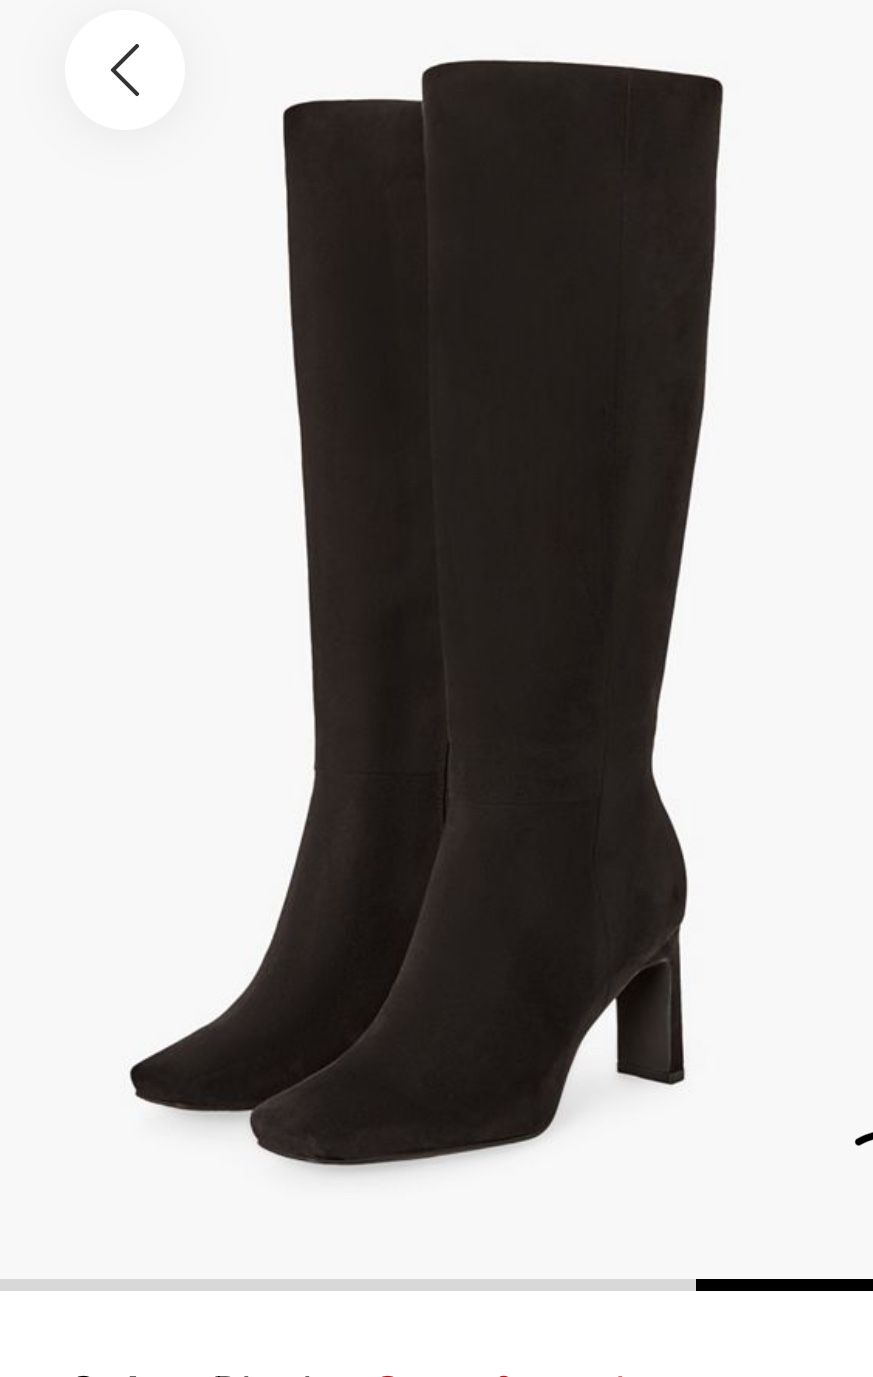 Just Fab Evelyn Heeled Boot - Size 5.5